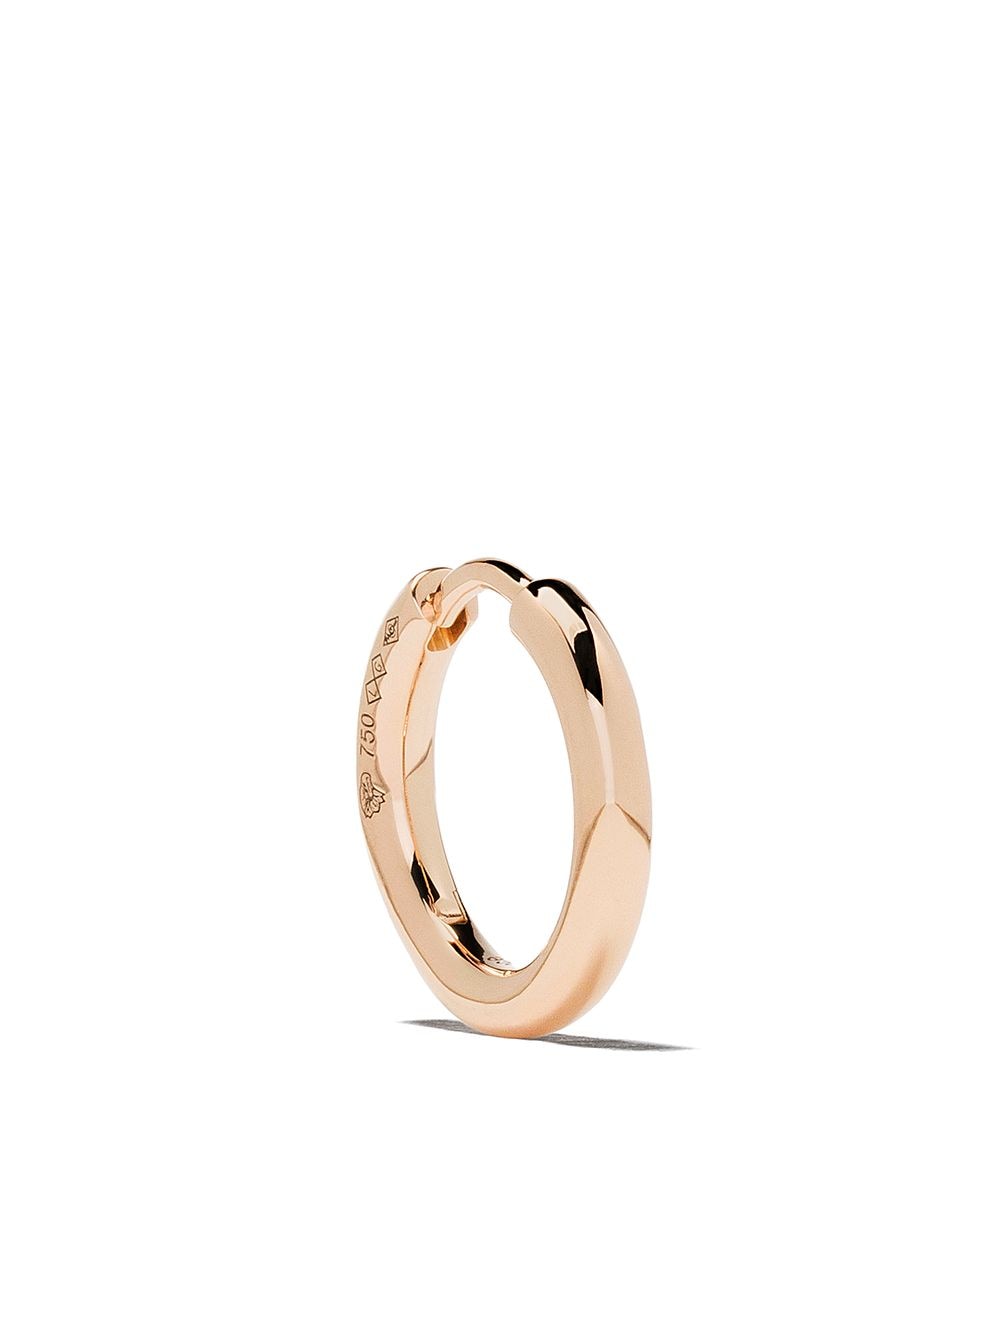 Le Gramme 18kt polished red gold 21/10G Bangle earring - Pink von Le Gramme